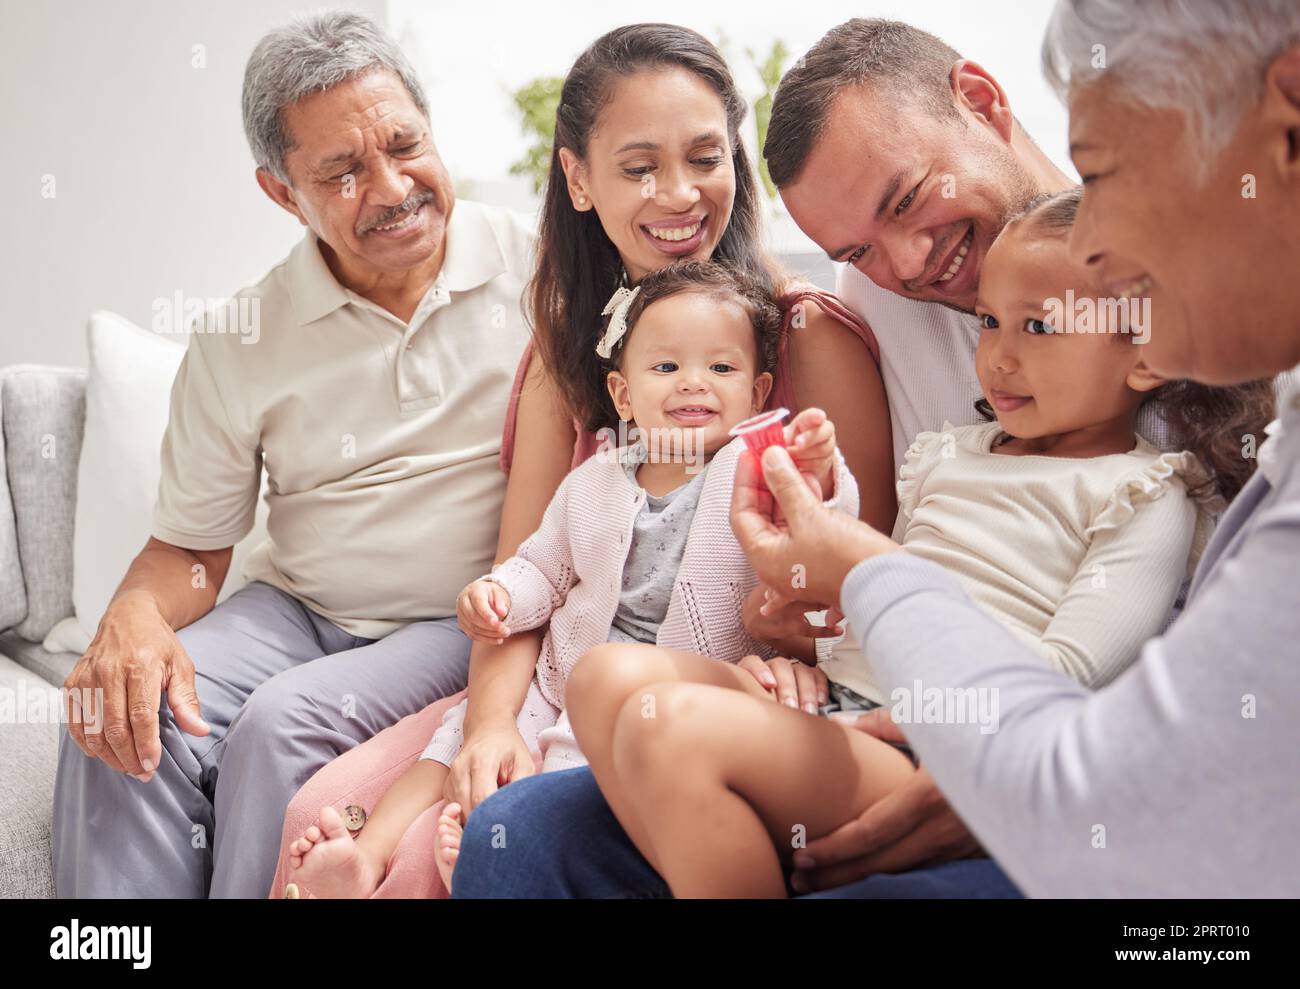 Family, love and children with grandparents and kids on a sofa in the living room during a visit at home. Happy, smile and relationship with a man, woman and relatives sitting in a house together Stock Photo